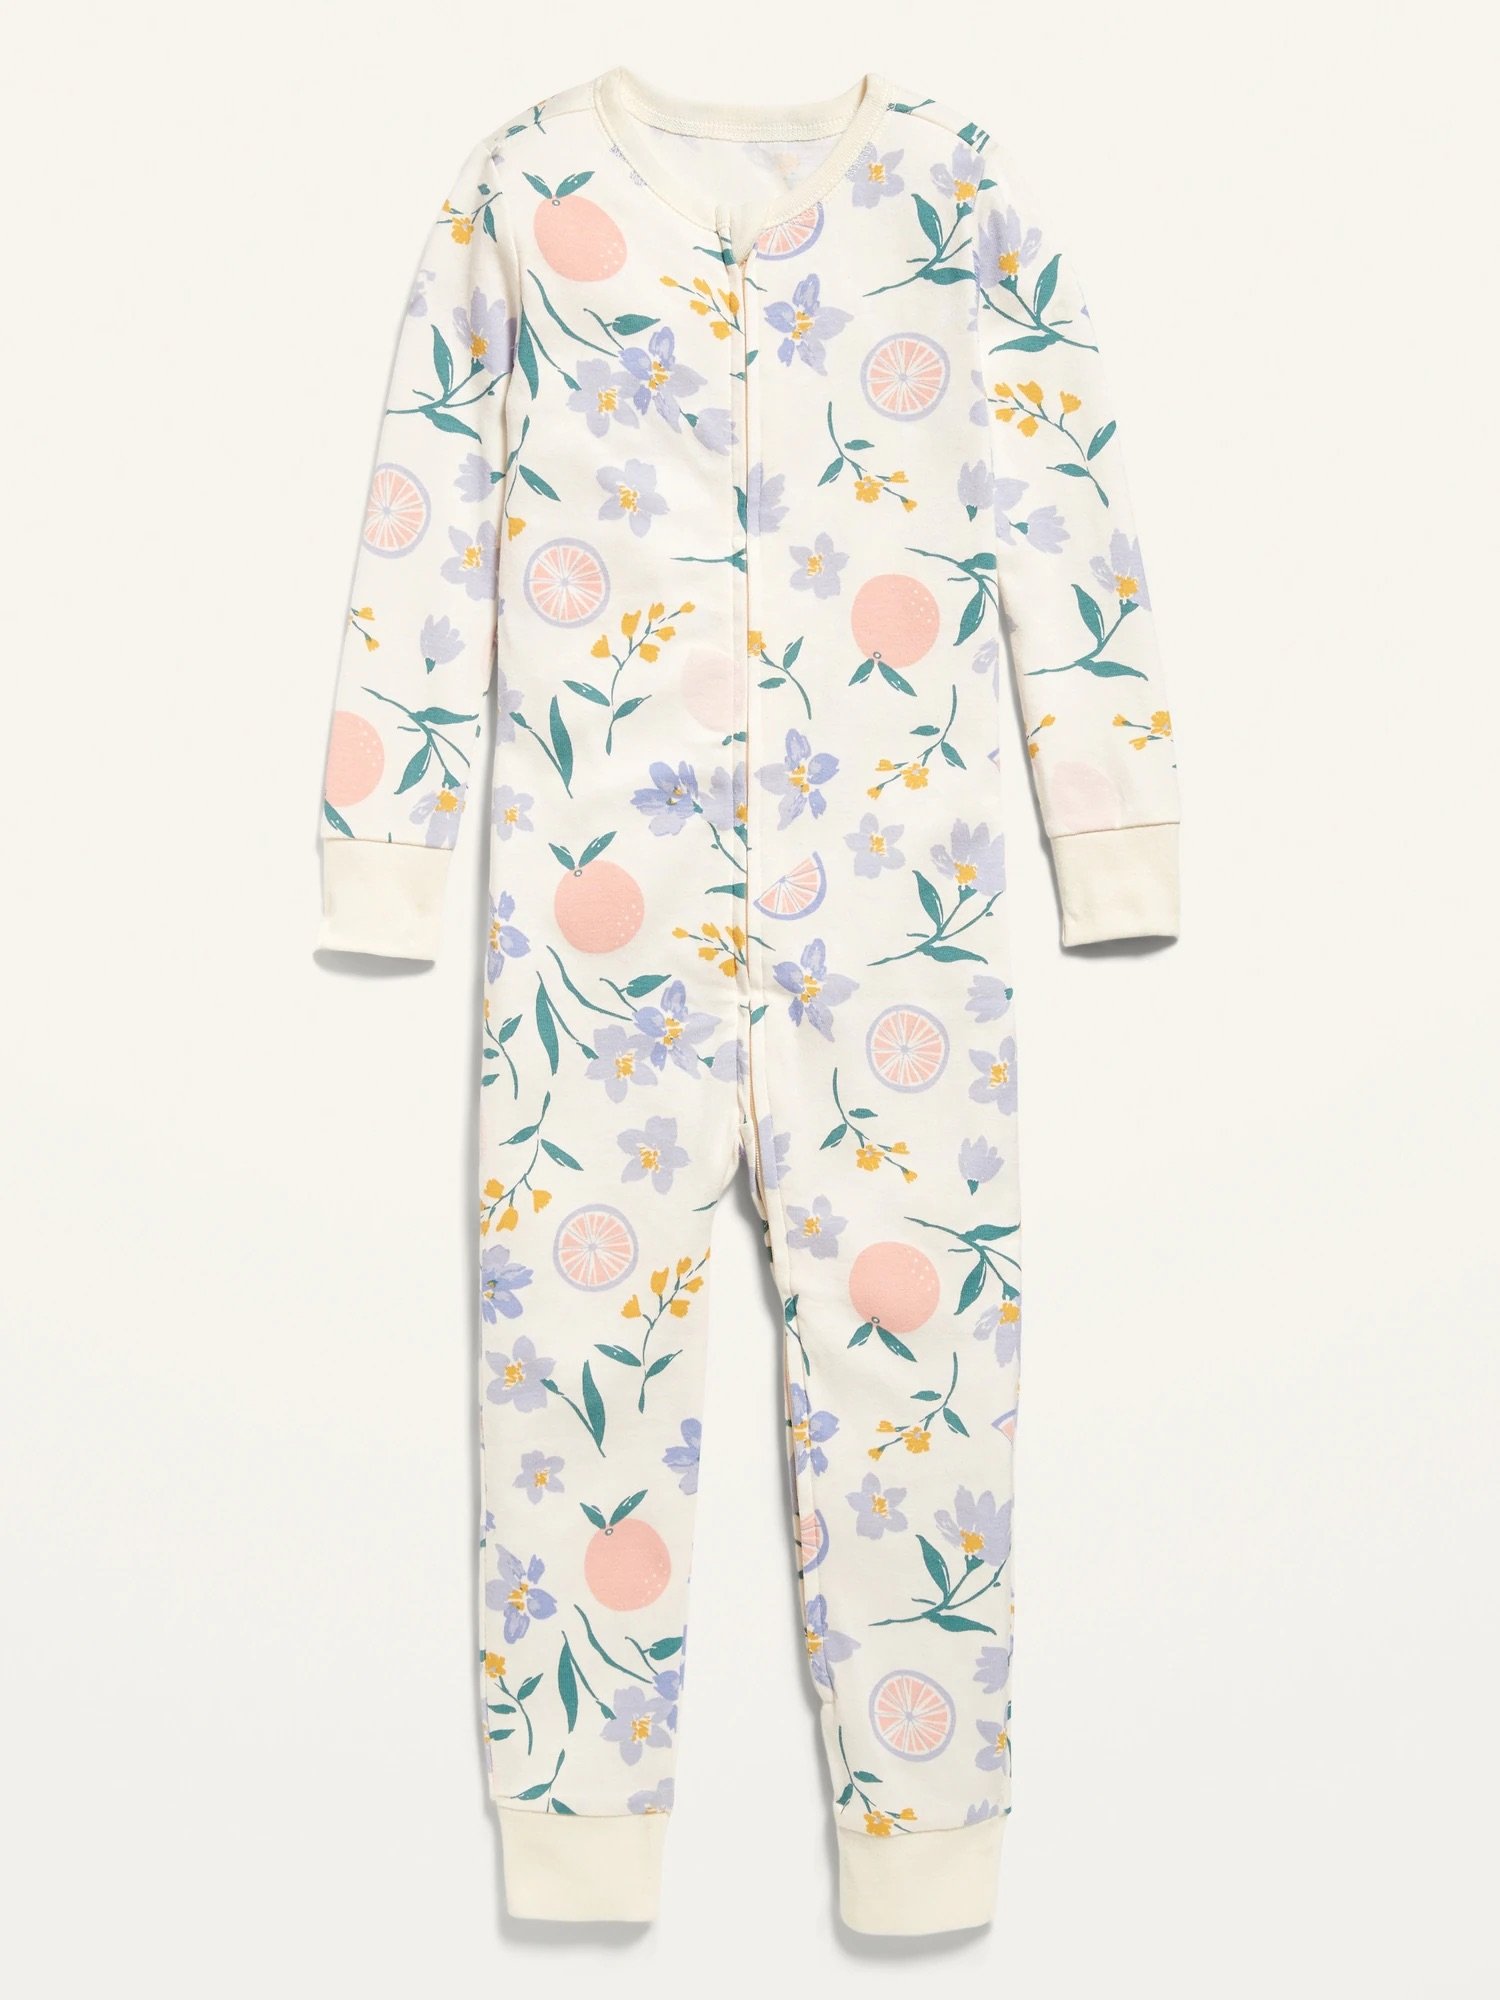 ON Creamy Floral Unisex Snug-Fit 2-Way-Zip Printed Pajama One-Piece for Toddler & Baby.jpeg